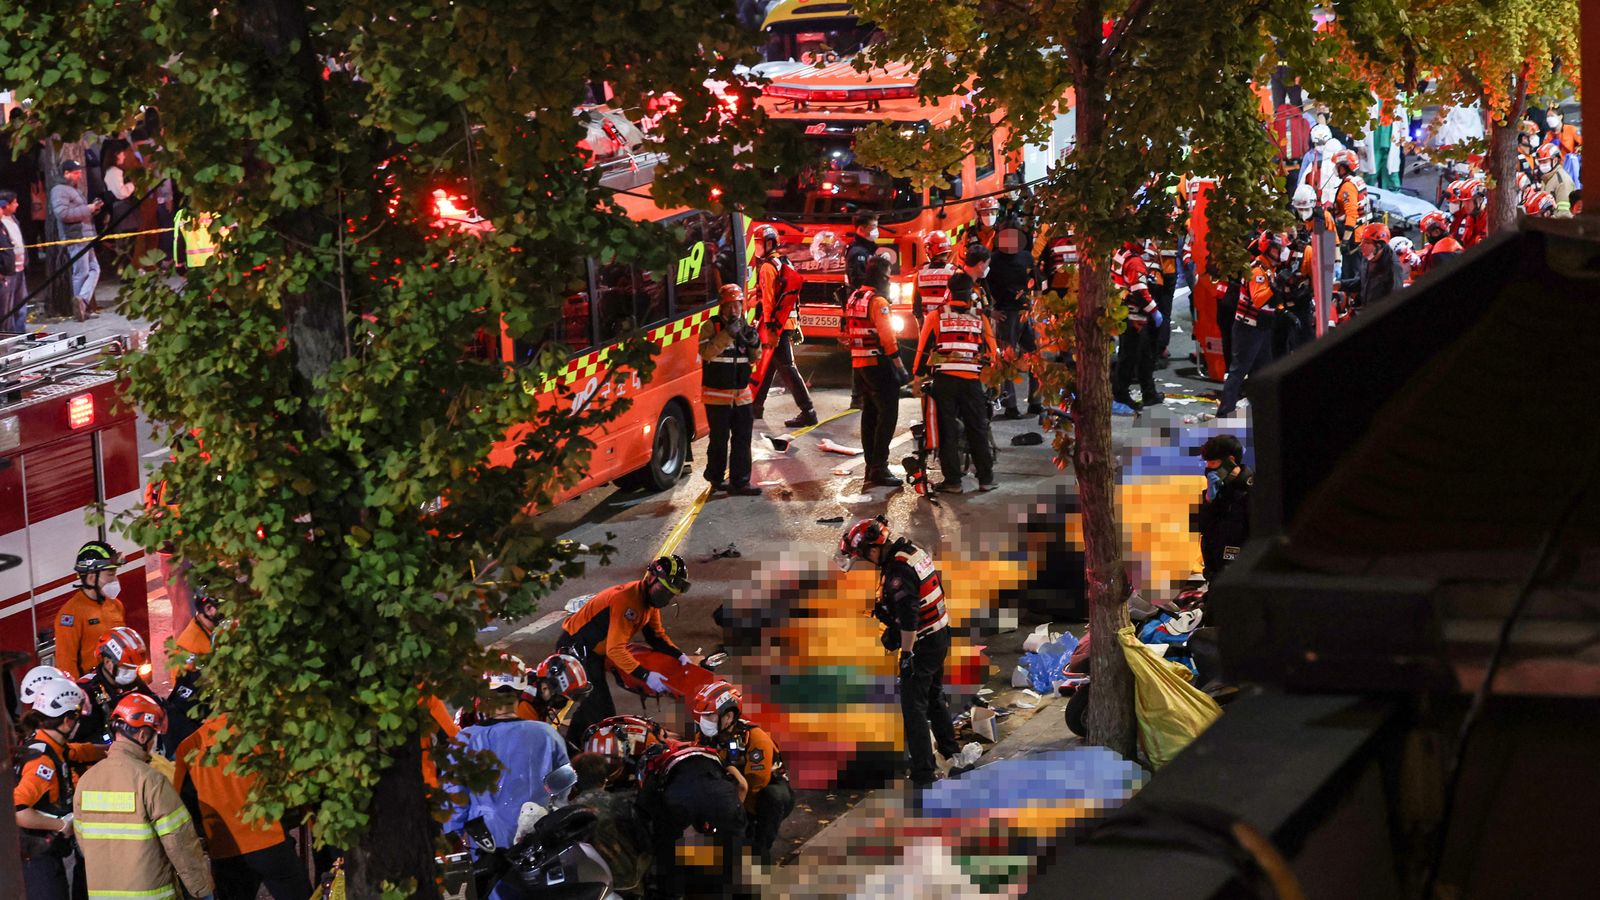 At least 120 dead after stampede during Halloween festivities in Itaewon, South Korea